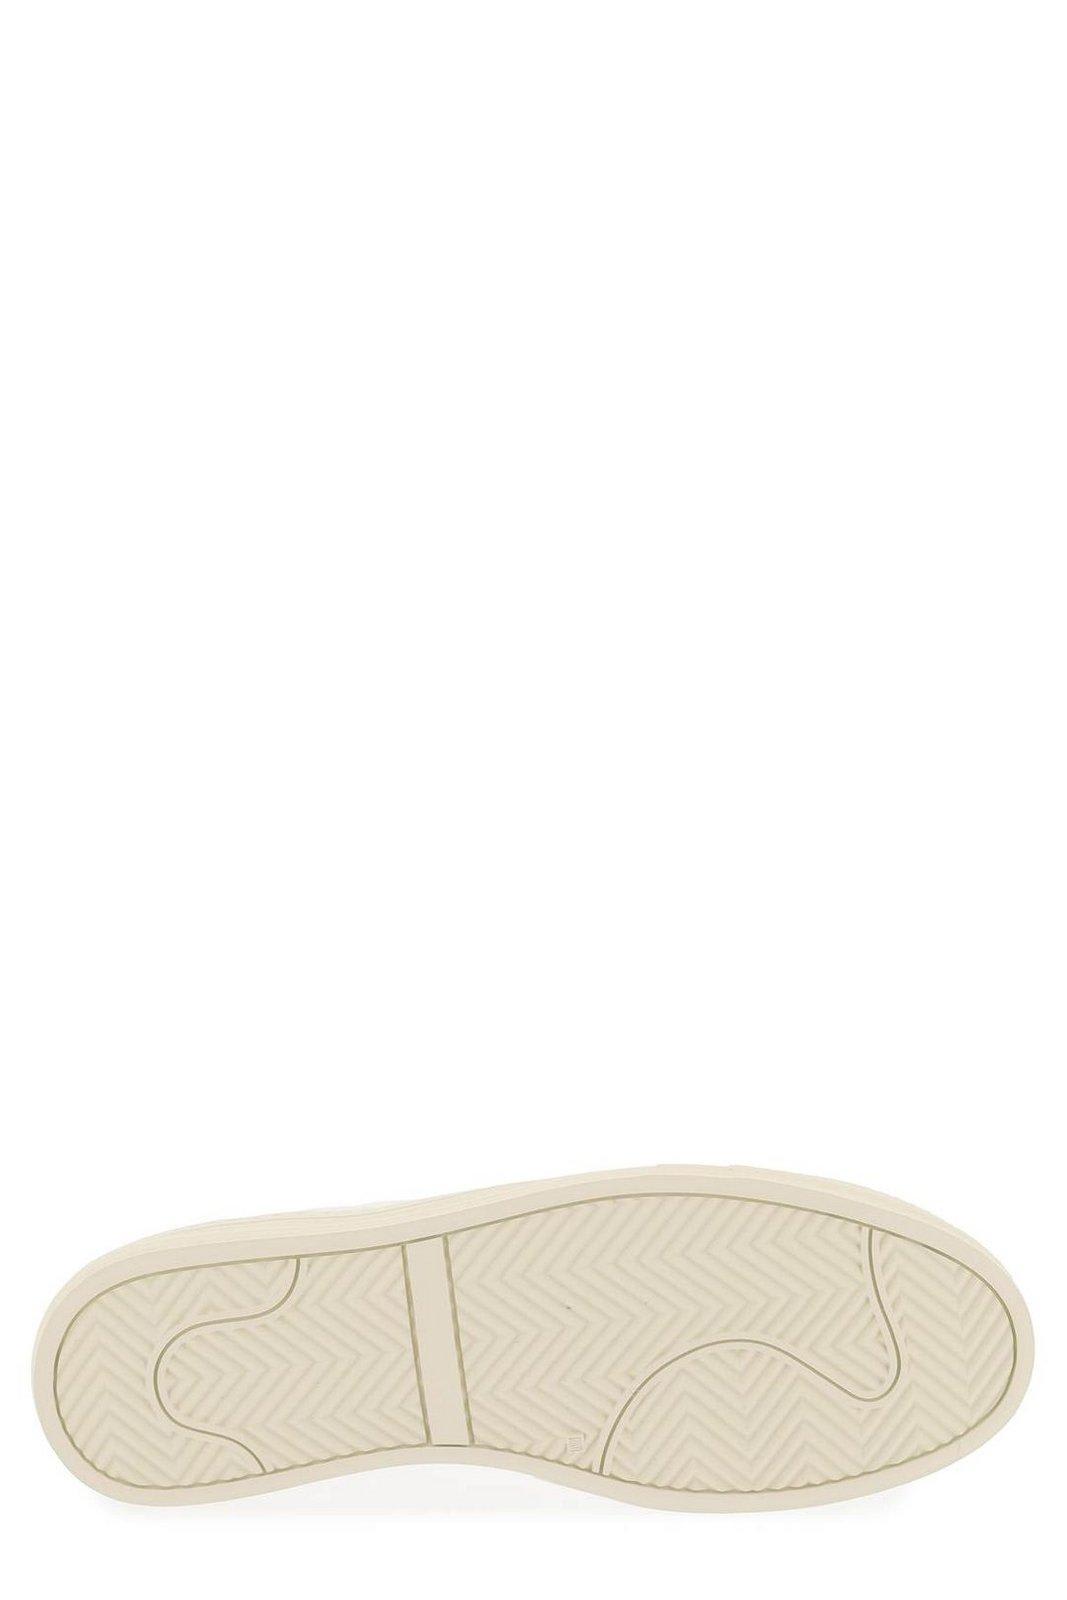 Shop Common Projects Tournament Round Toe Sneakers In Off White (white)